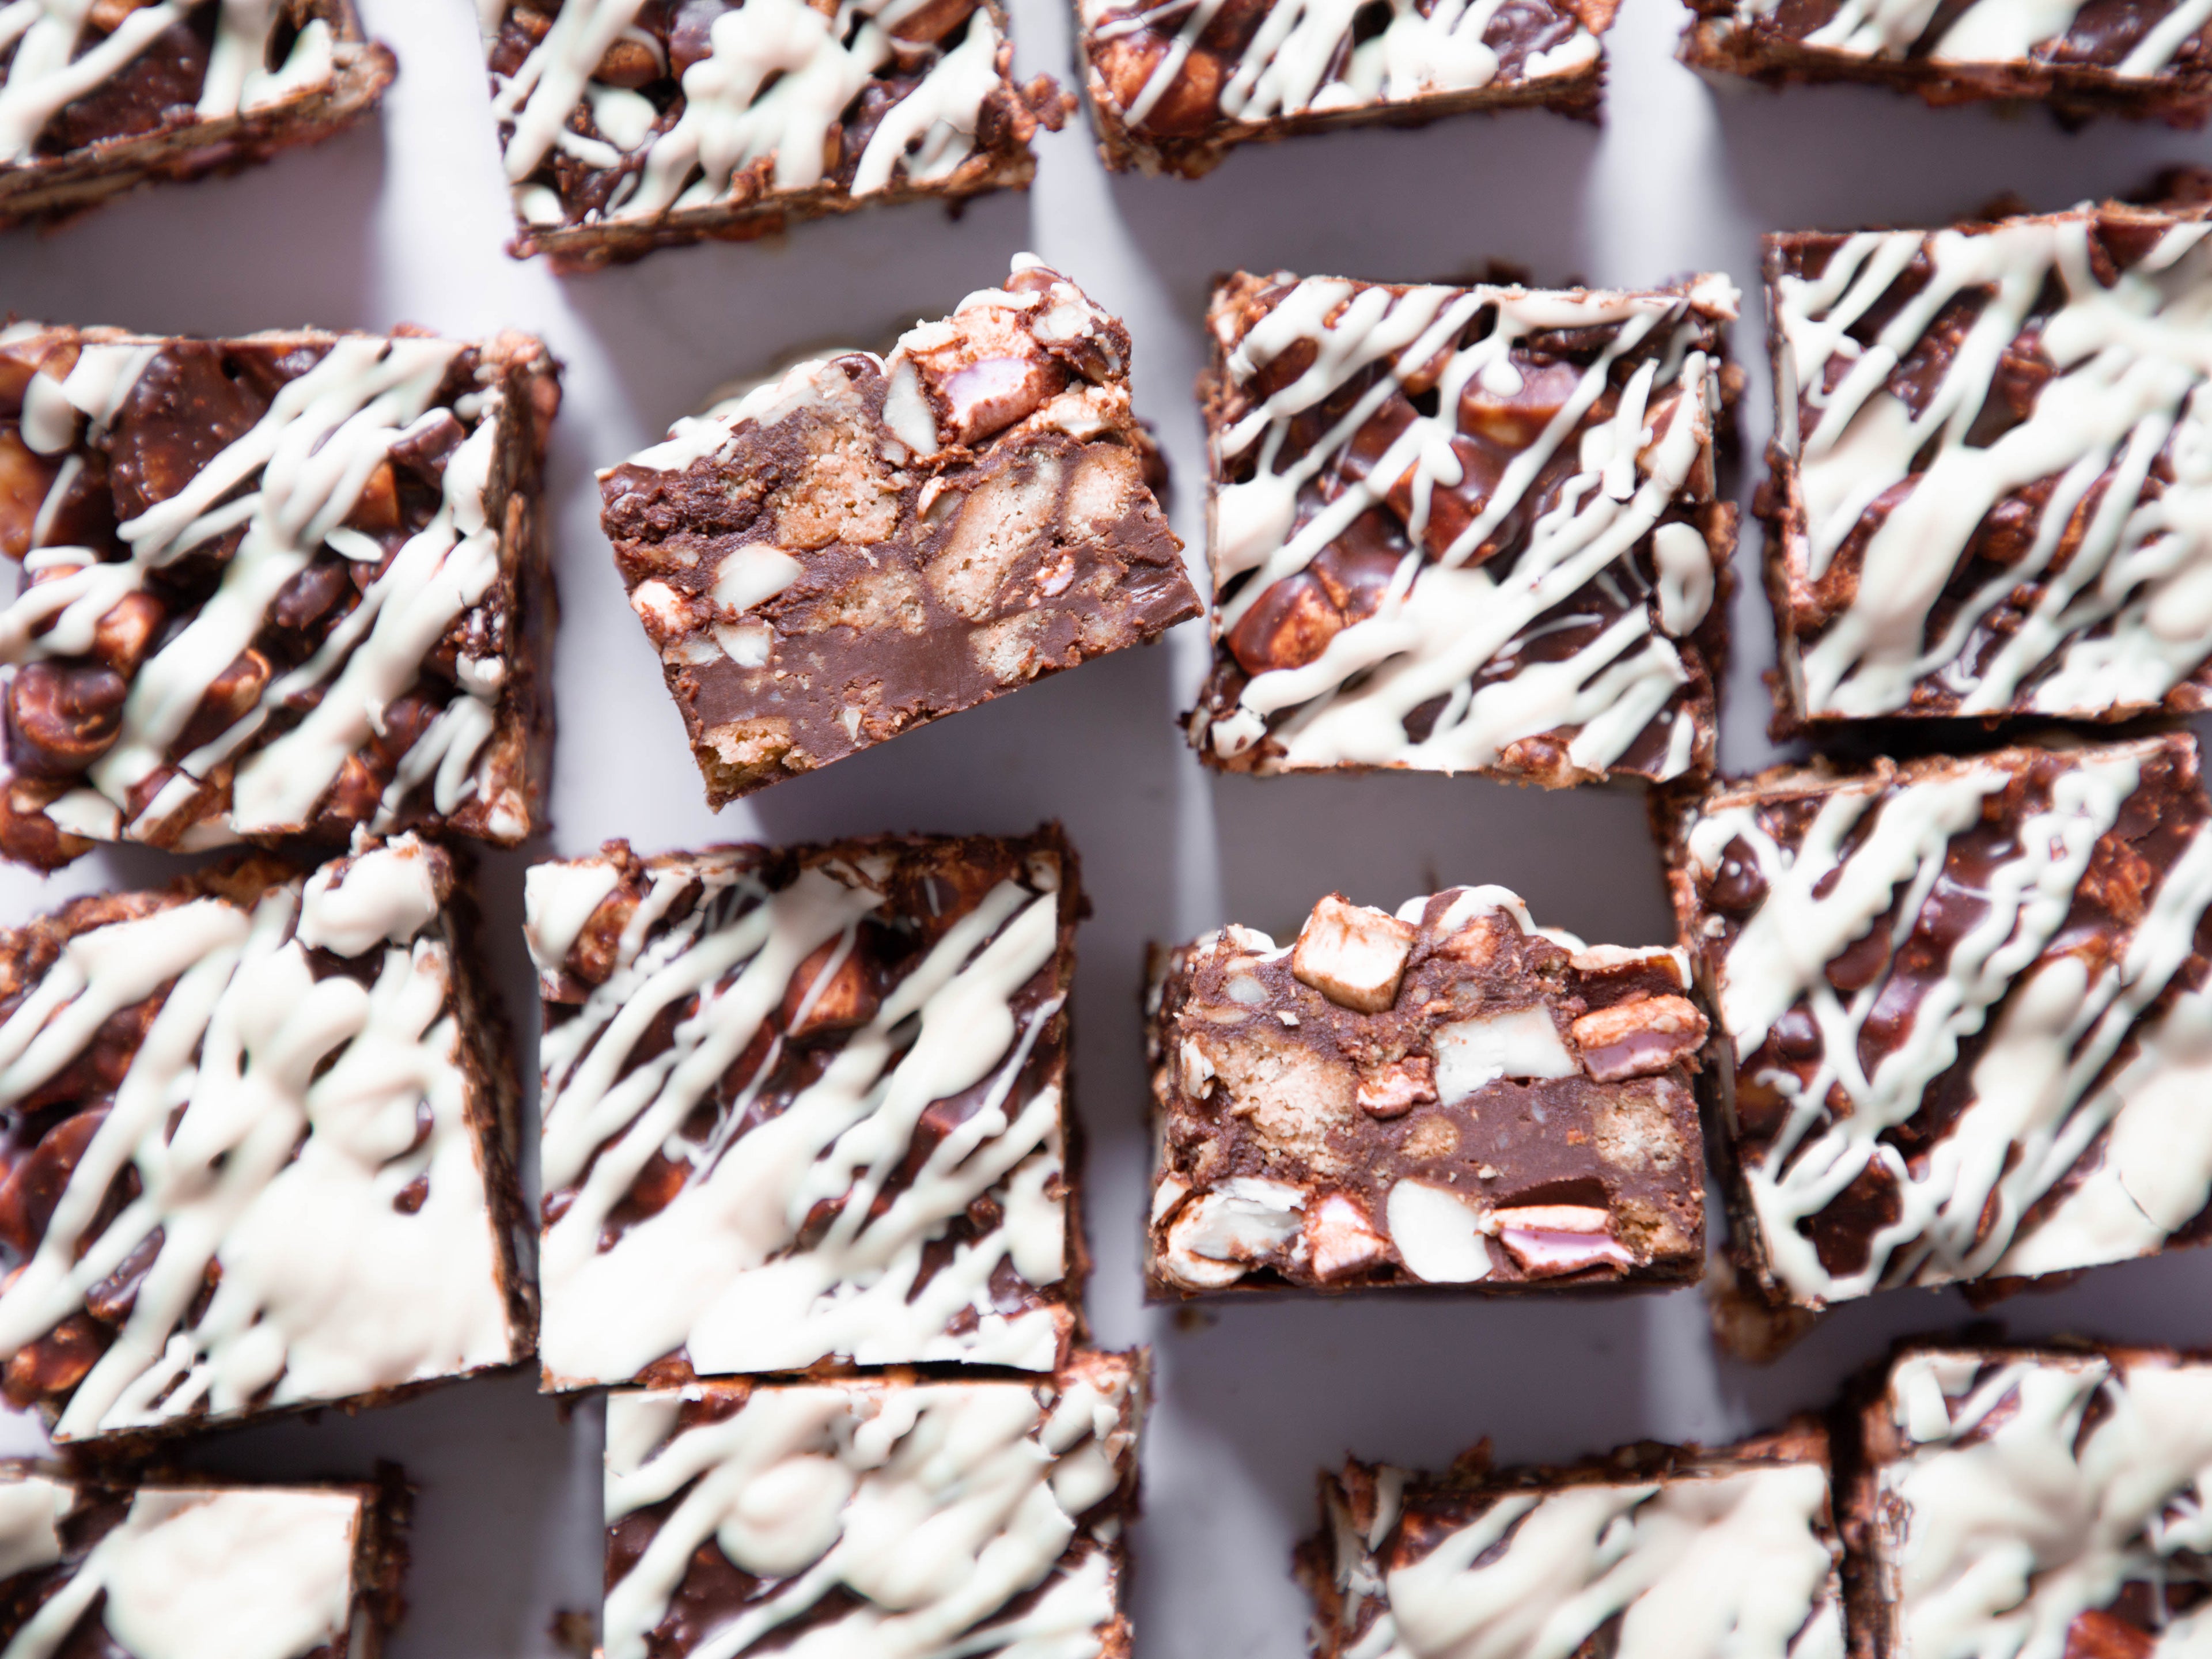 Close up shot of square of rocky road, some drizzled with white chocolate and two squares turned on their sides to showing filling